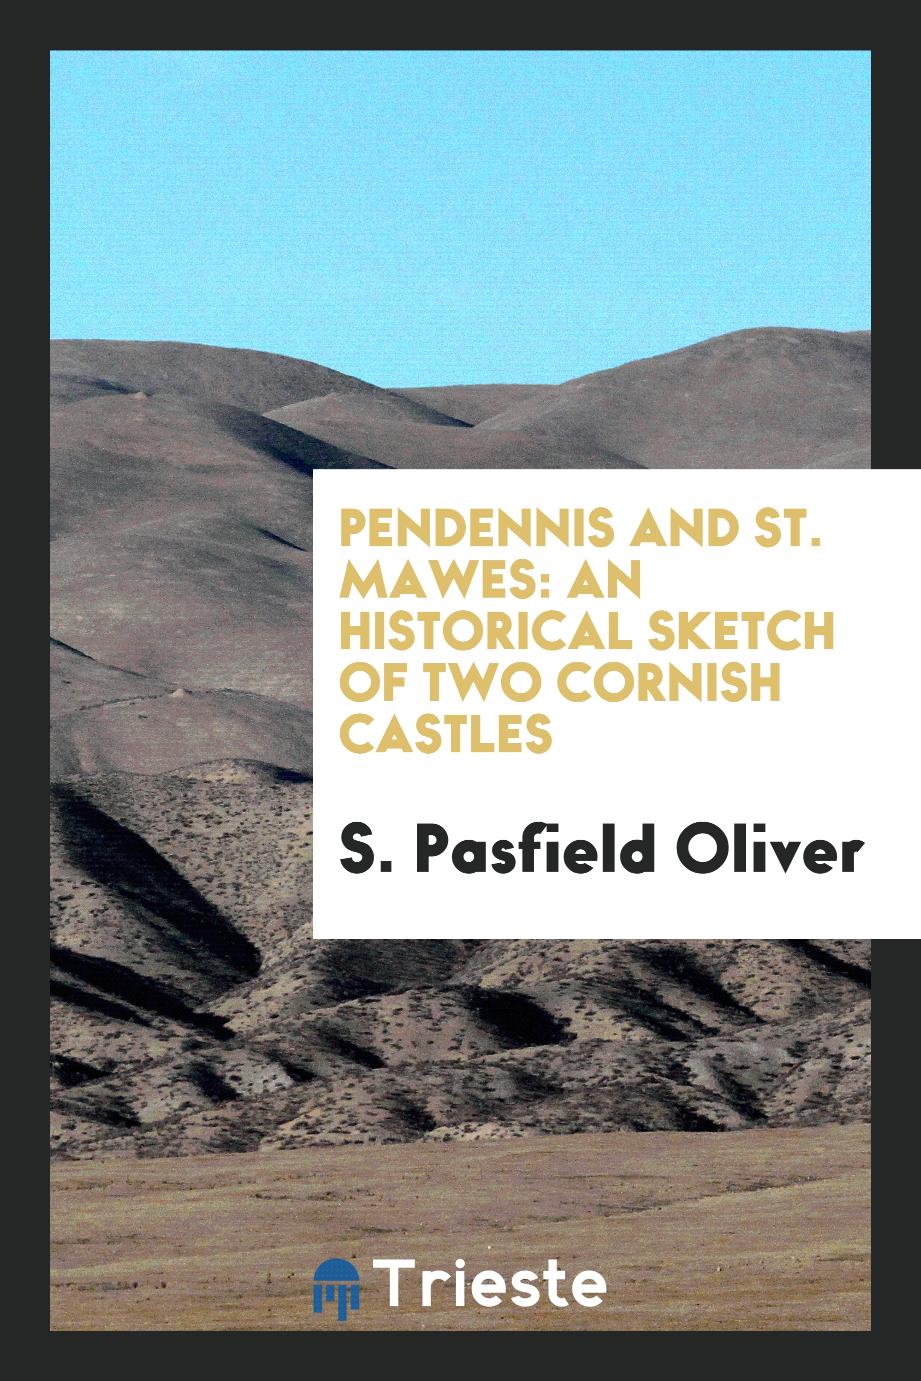 Pendennis and St. Mawes: An Historical Sketch of Two Cornish Castles